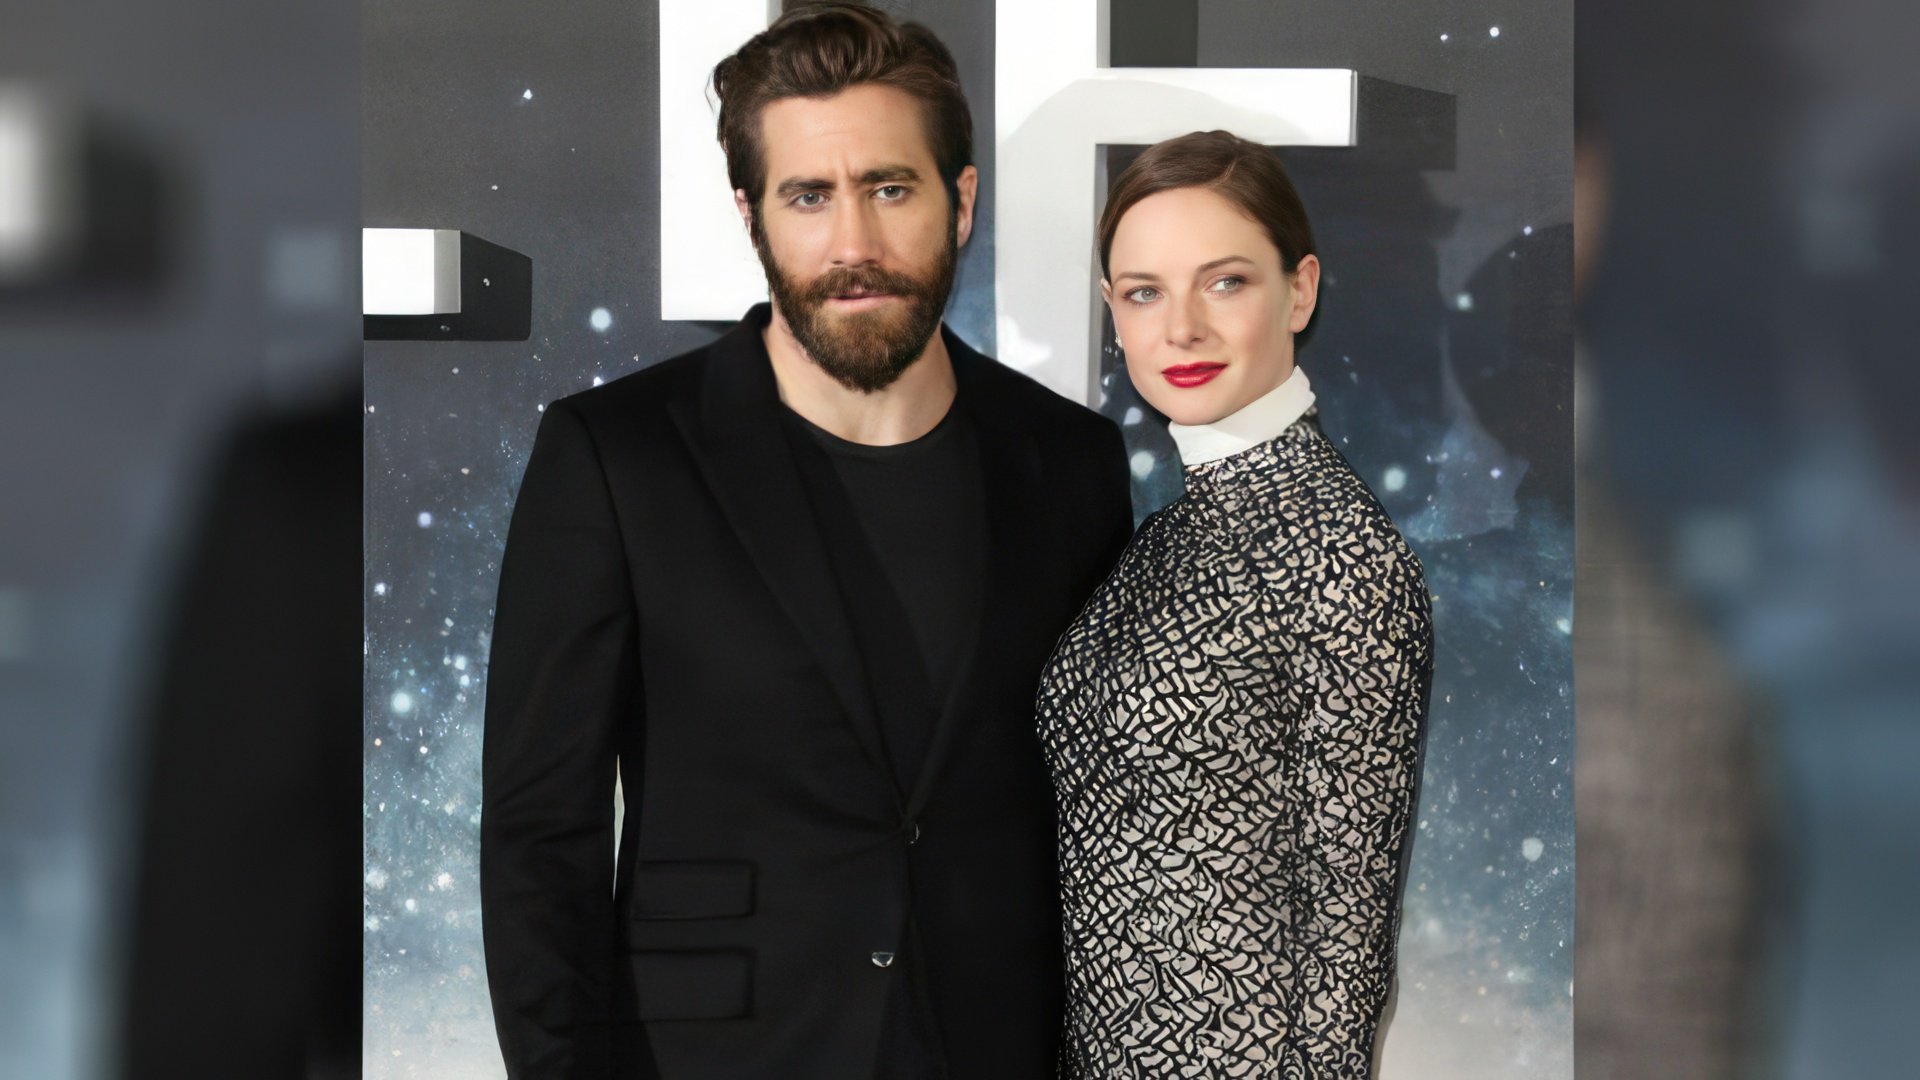 Rebecca Ferguson and Jake Gyllenhaal at the premiere of the movie Life